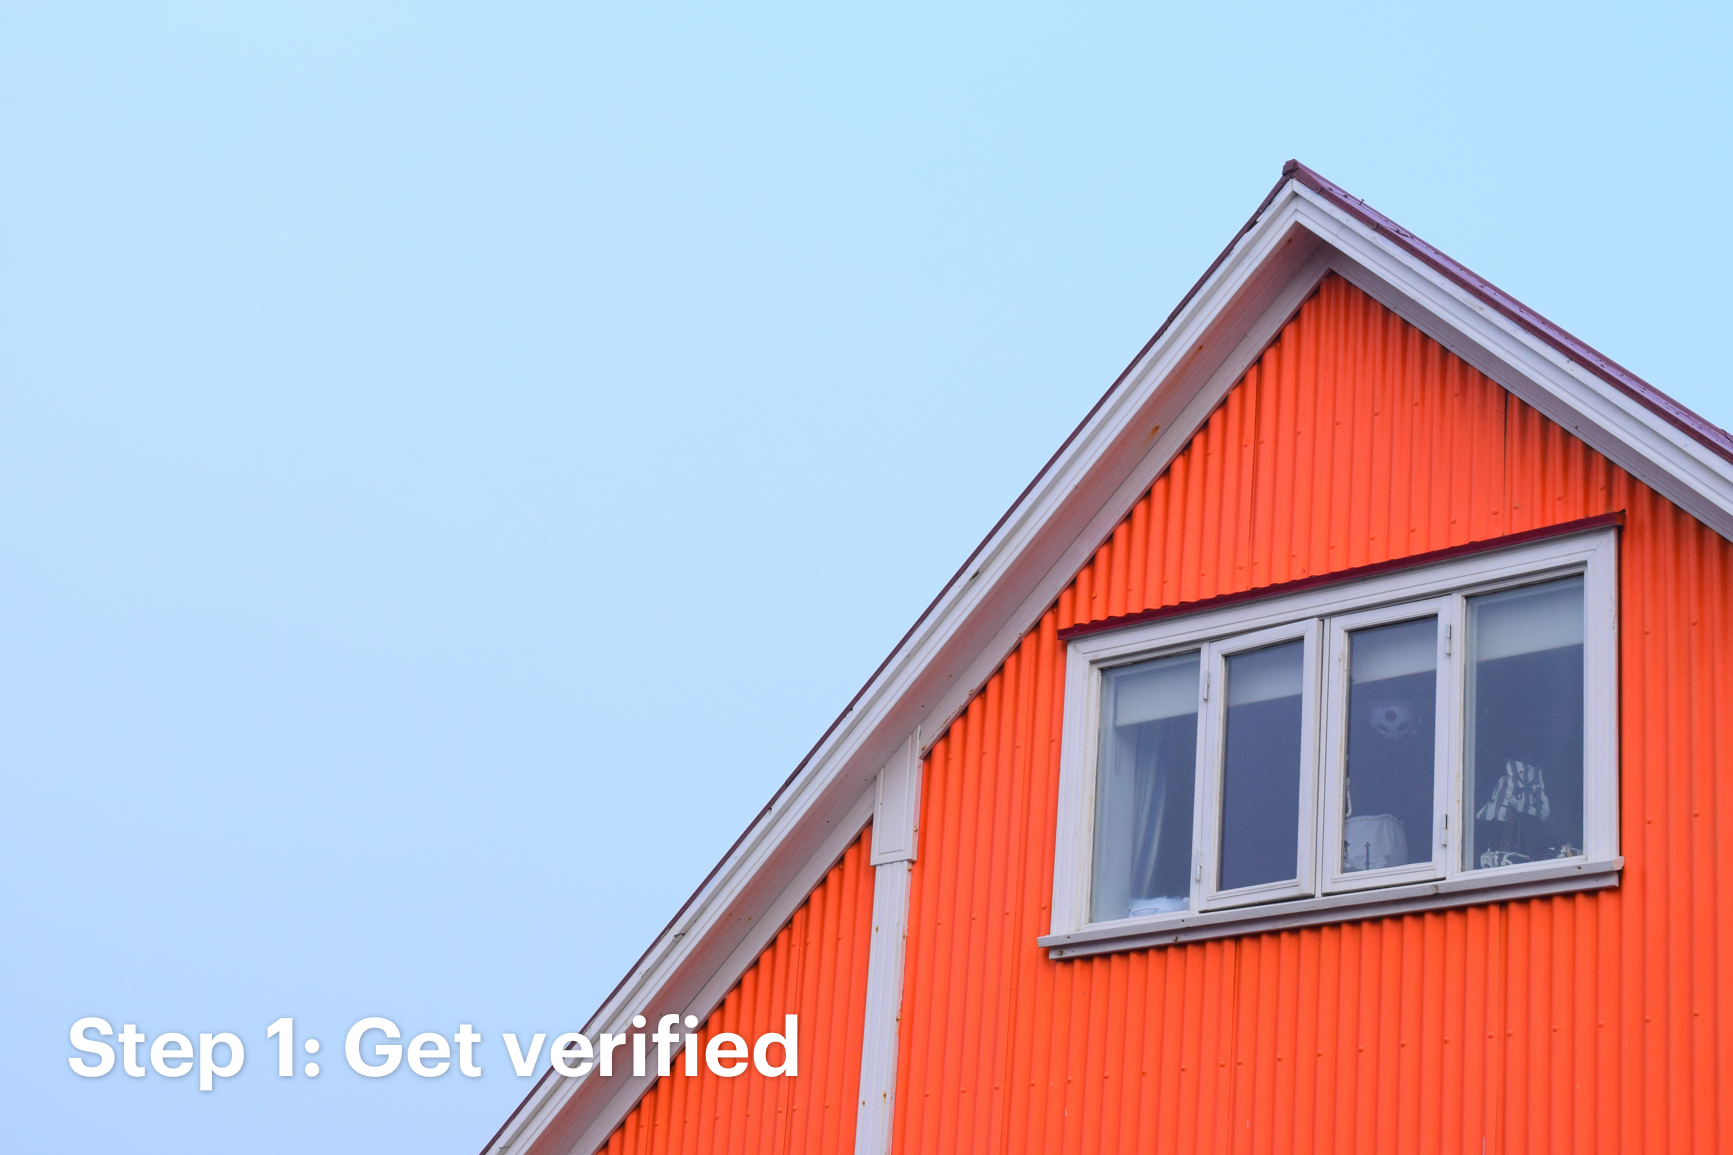  Close Up of Red Home Against Light Blue Sky with Text That Reads: Step 1: Get Verified